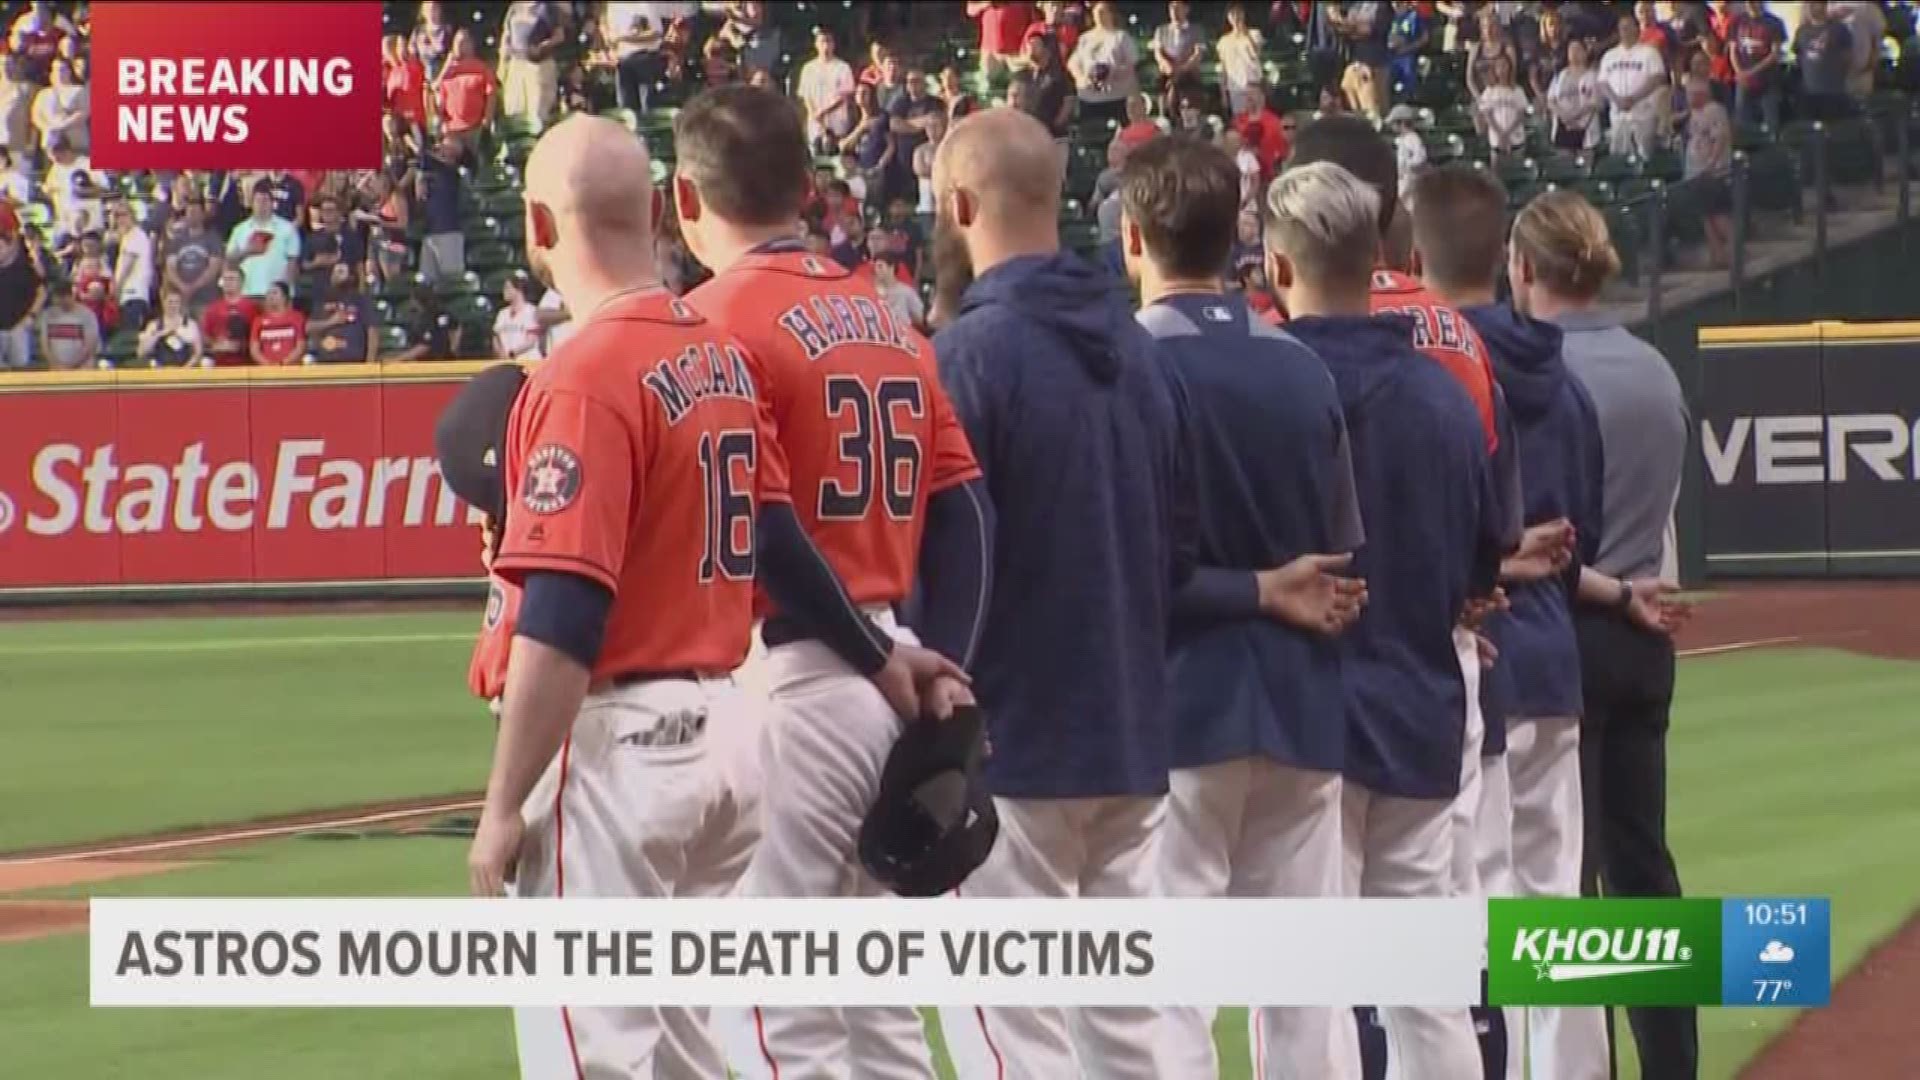 The Houston Astros remembered victims of the mass shooting at Santa Fe High School with a moment of silence.